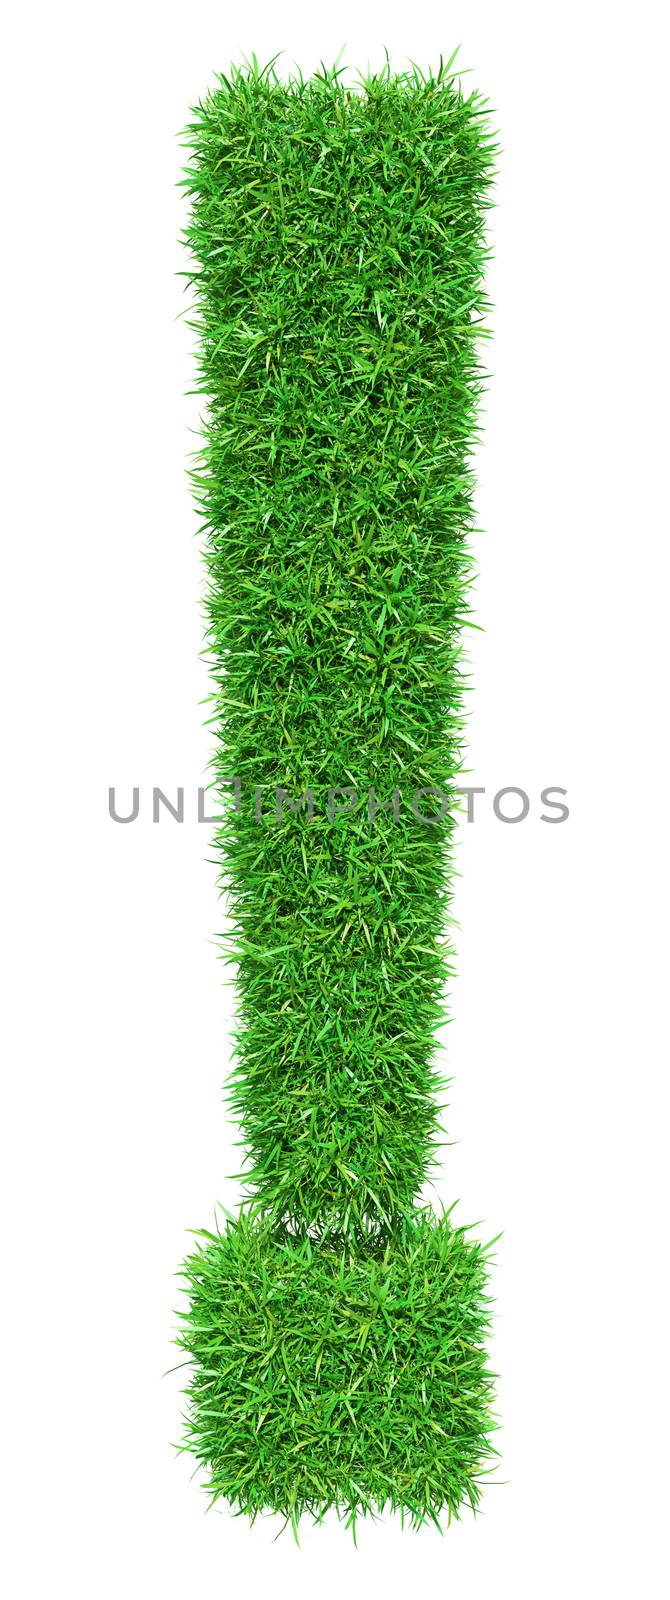 Green grass exclamation point by cherezoff